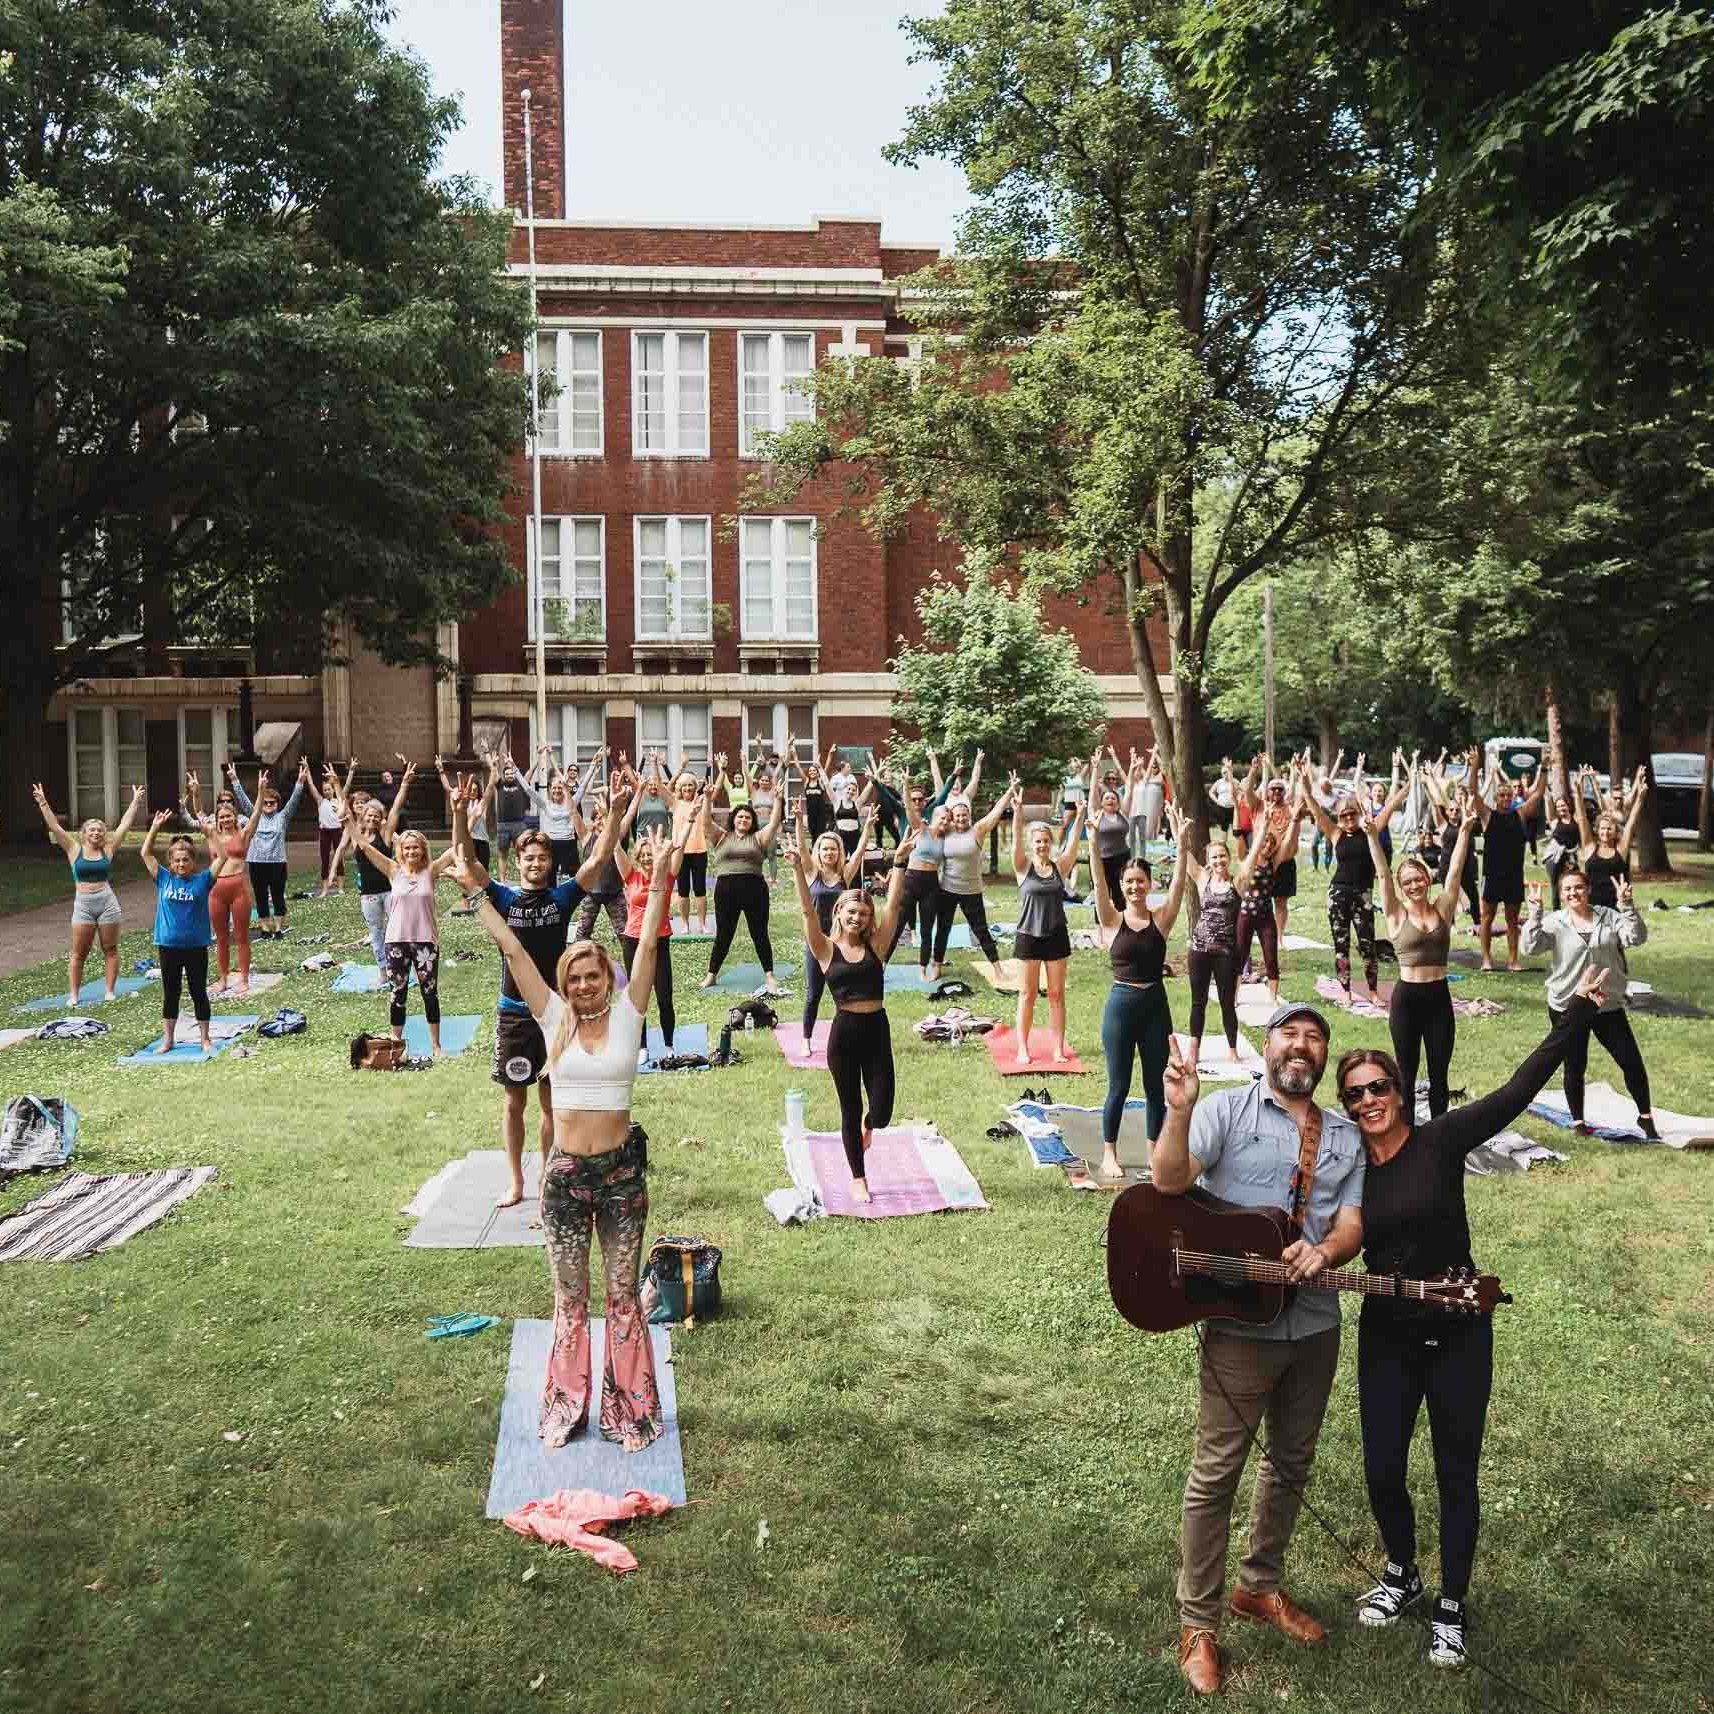 Get ready to groove at Yoga in the Park this Saturday! 🌞 

Bring your crew for some outdoor fun! Special guest Shawn Brewster will be strumming acoustic magic while Natalie leads a blissful all-levels flow from 9-10am. 

Afterward, hit up the @heart